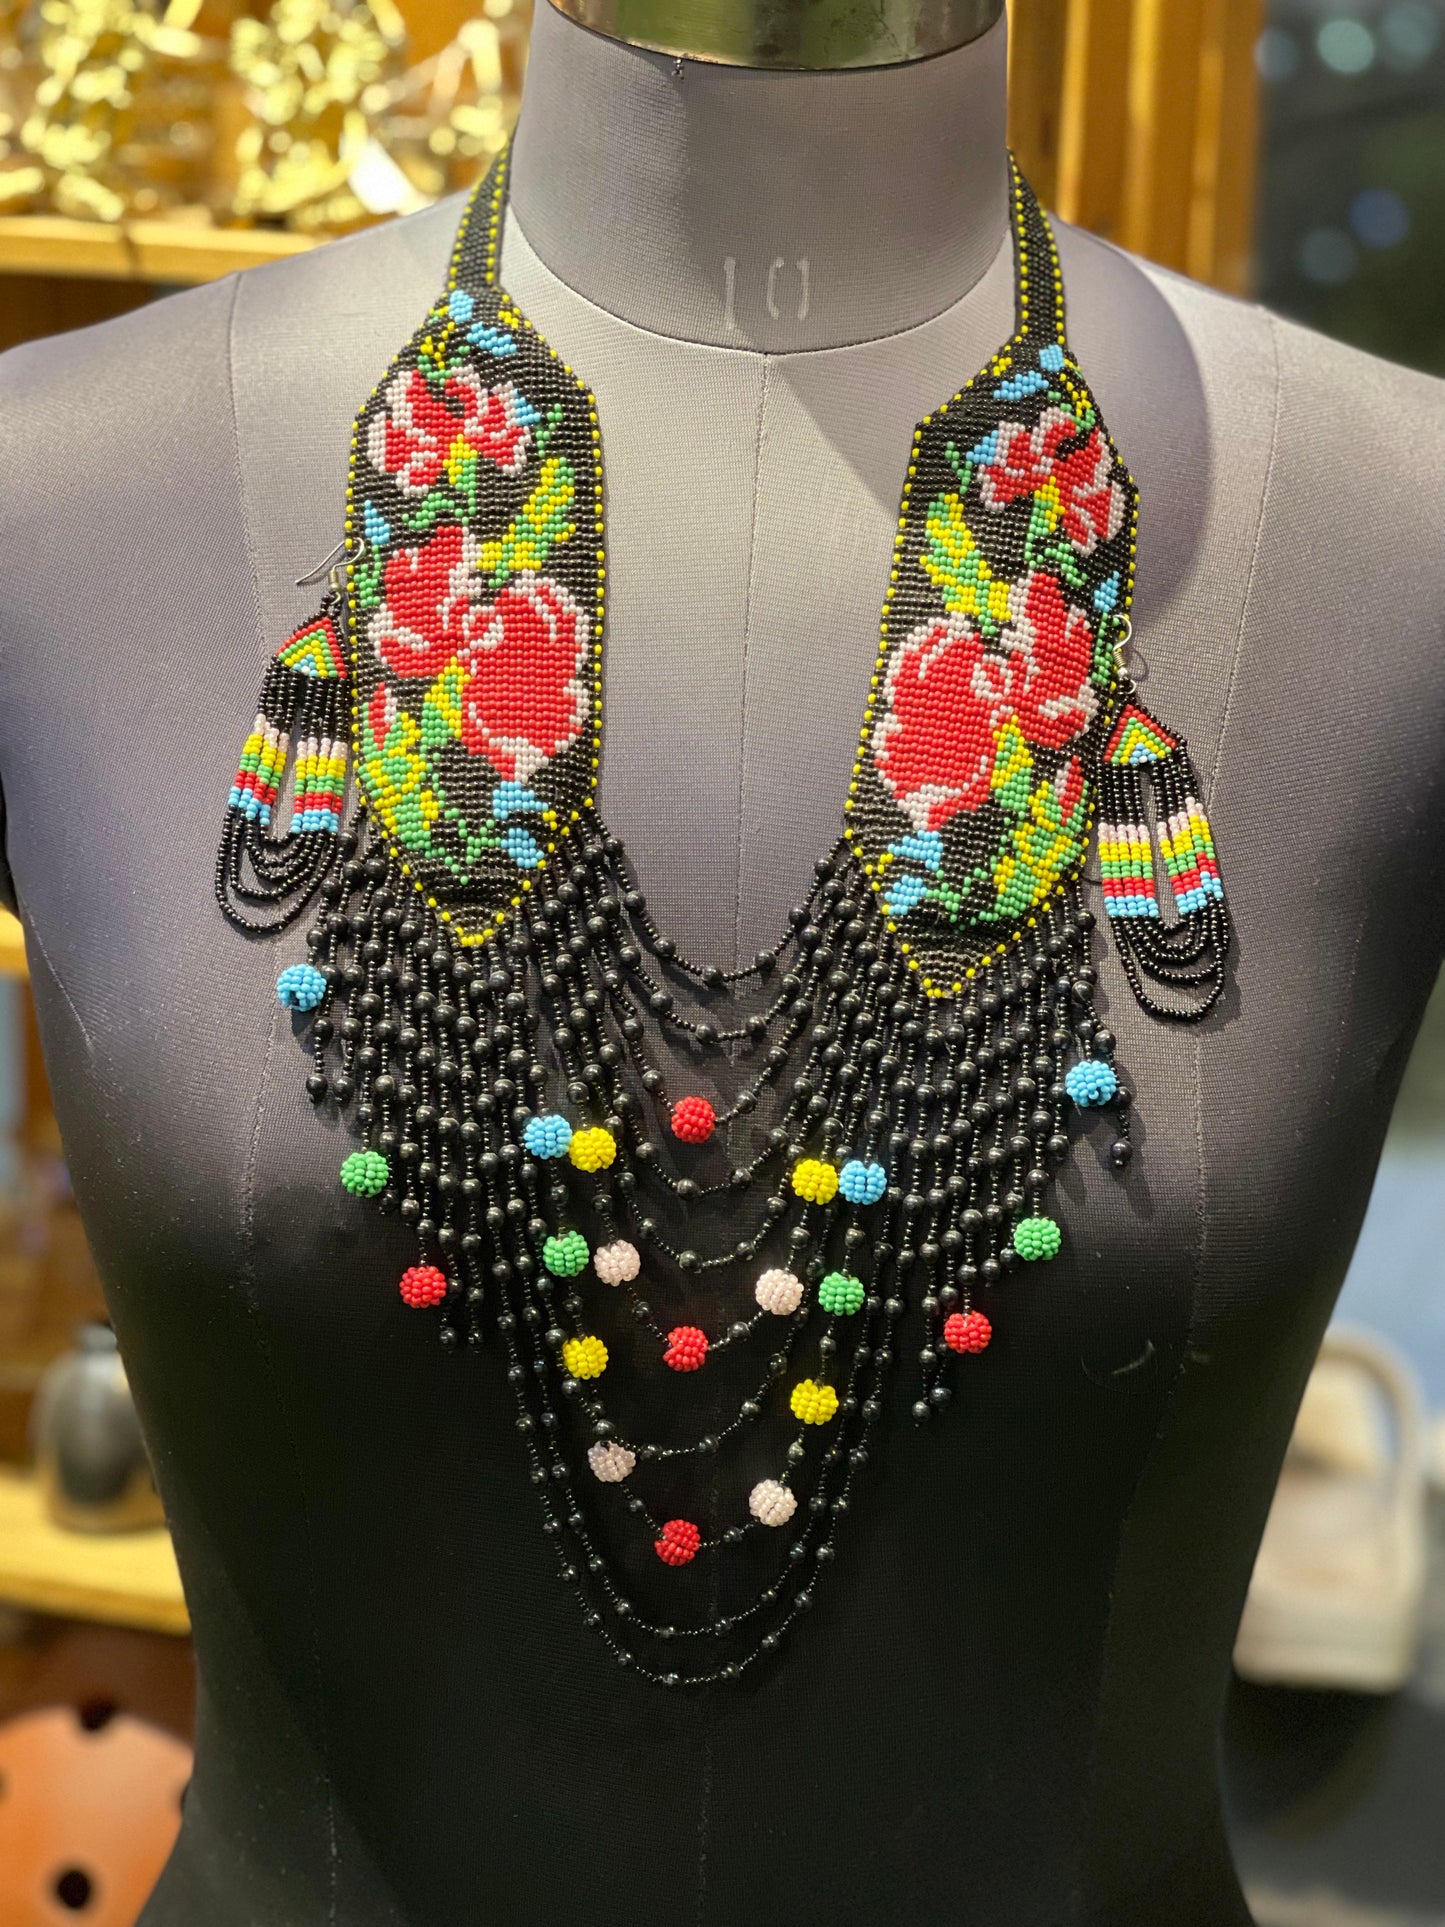 Black and red floral multiple strands design - hand crafted glass seed beads neckpiece, earrings set